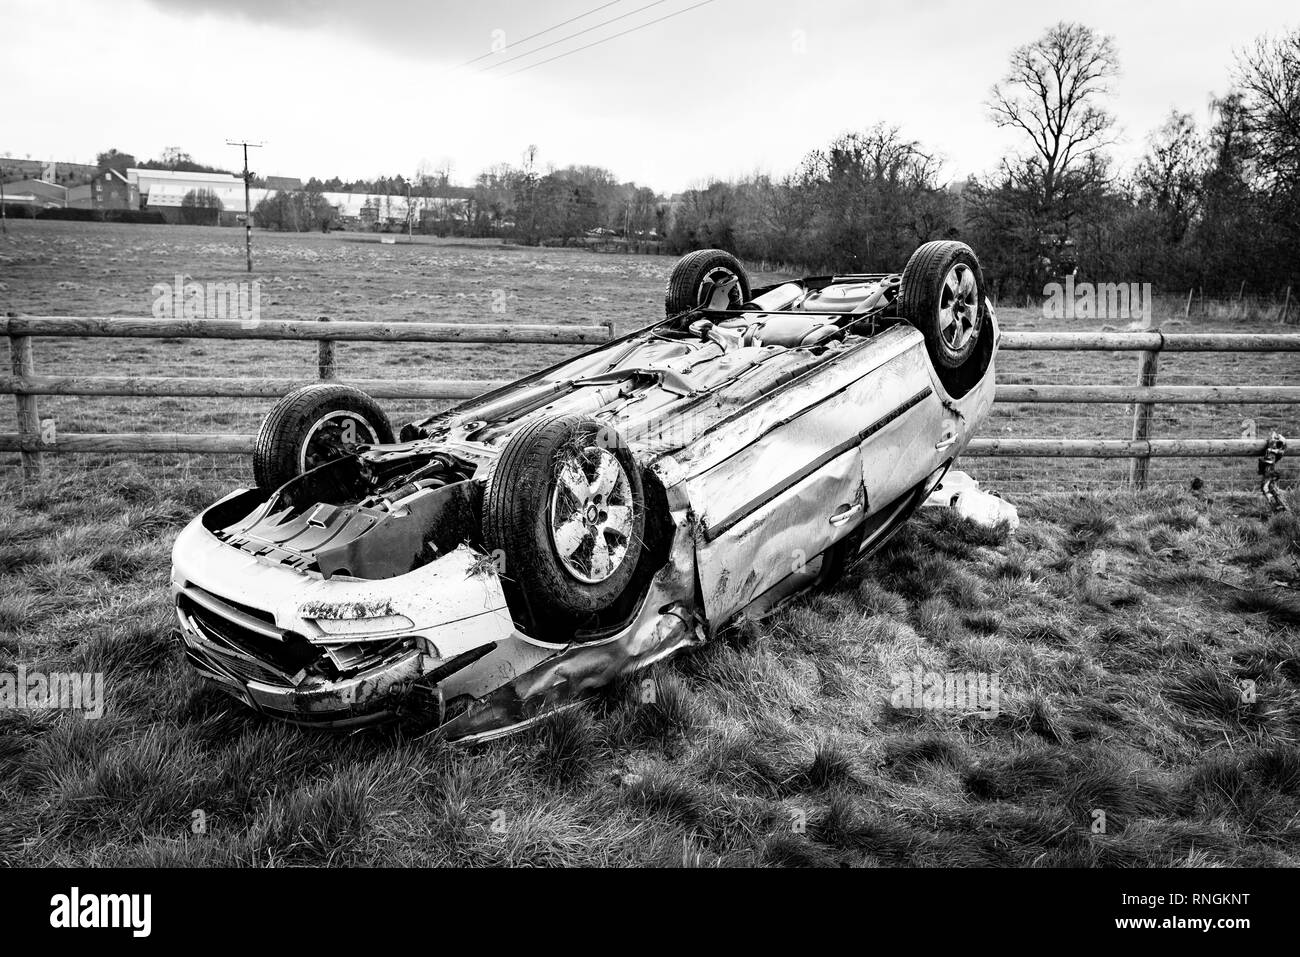 Car Crash and Car Damage. Vehicle upside down in a field surrounded by broken glass and debris after a high speed crash. Stock Photo